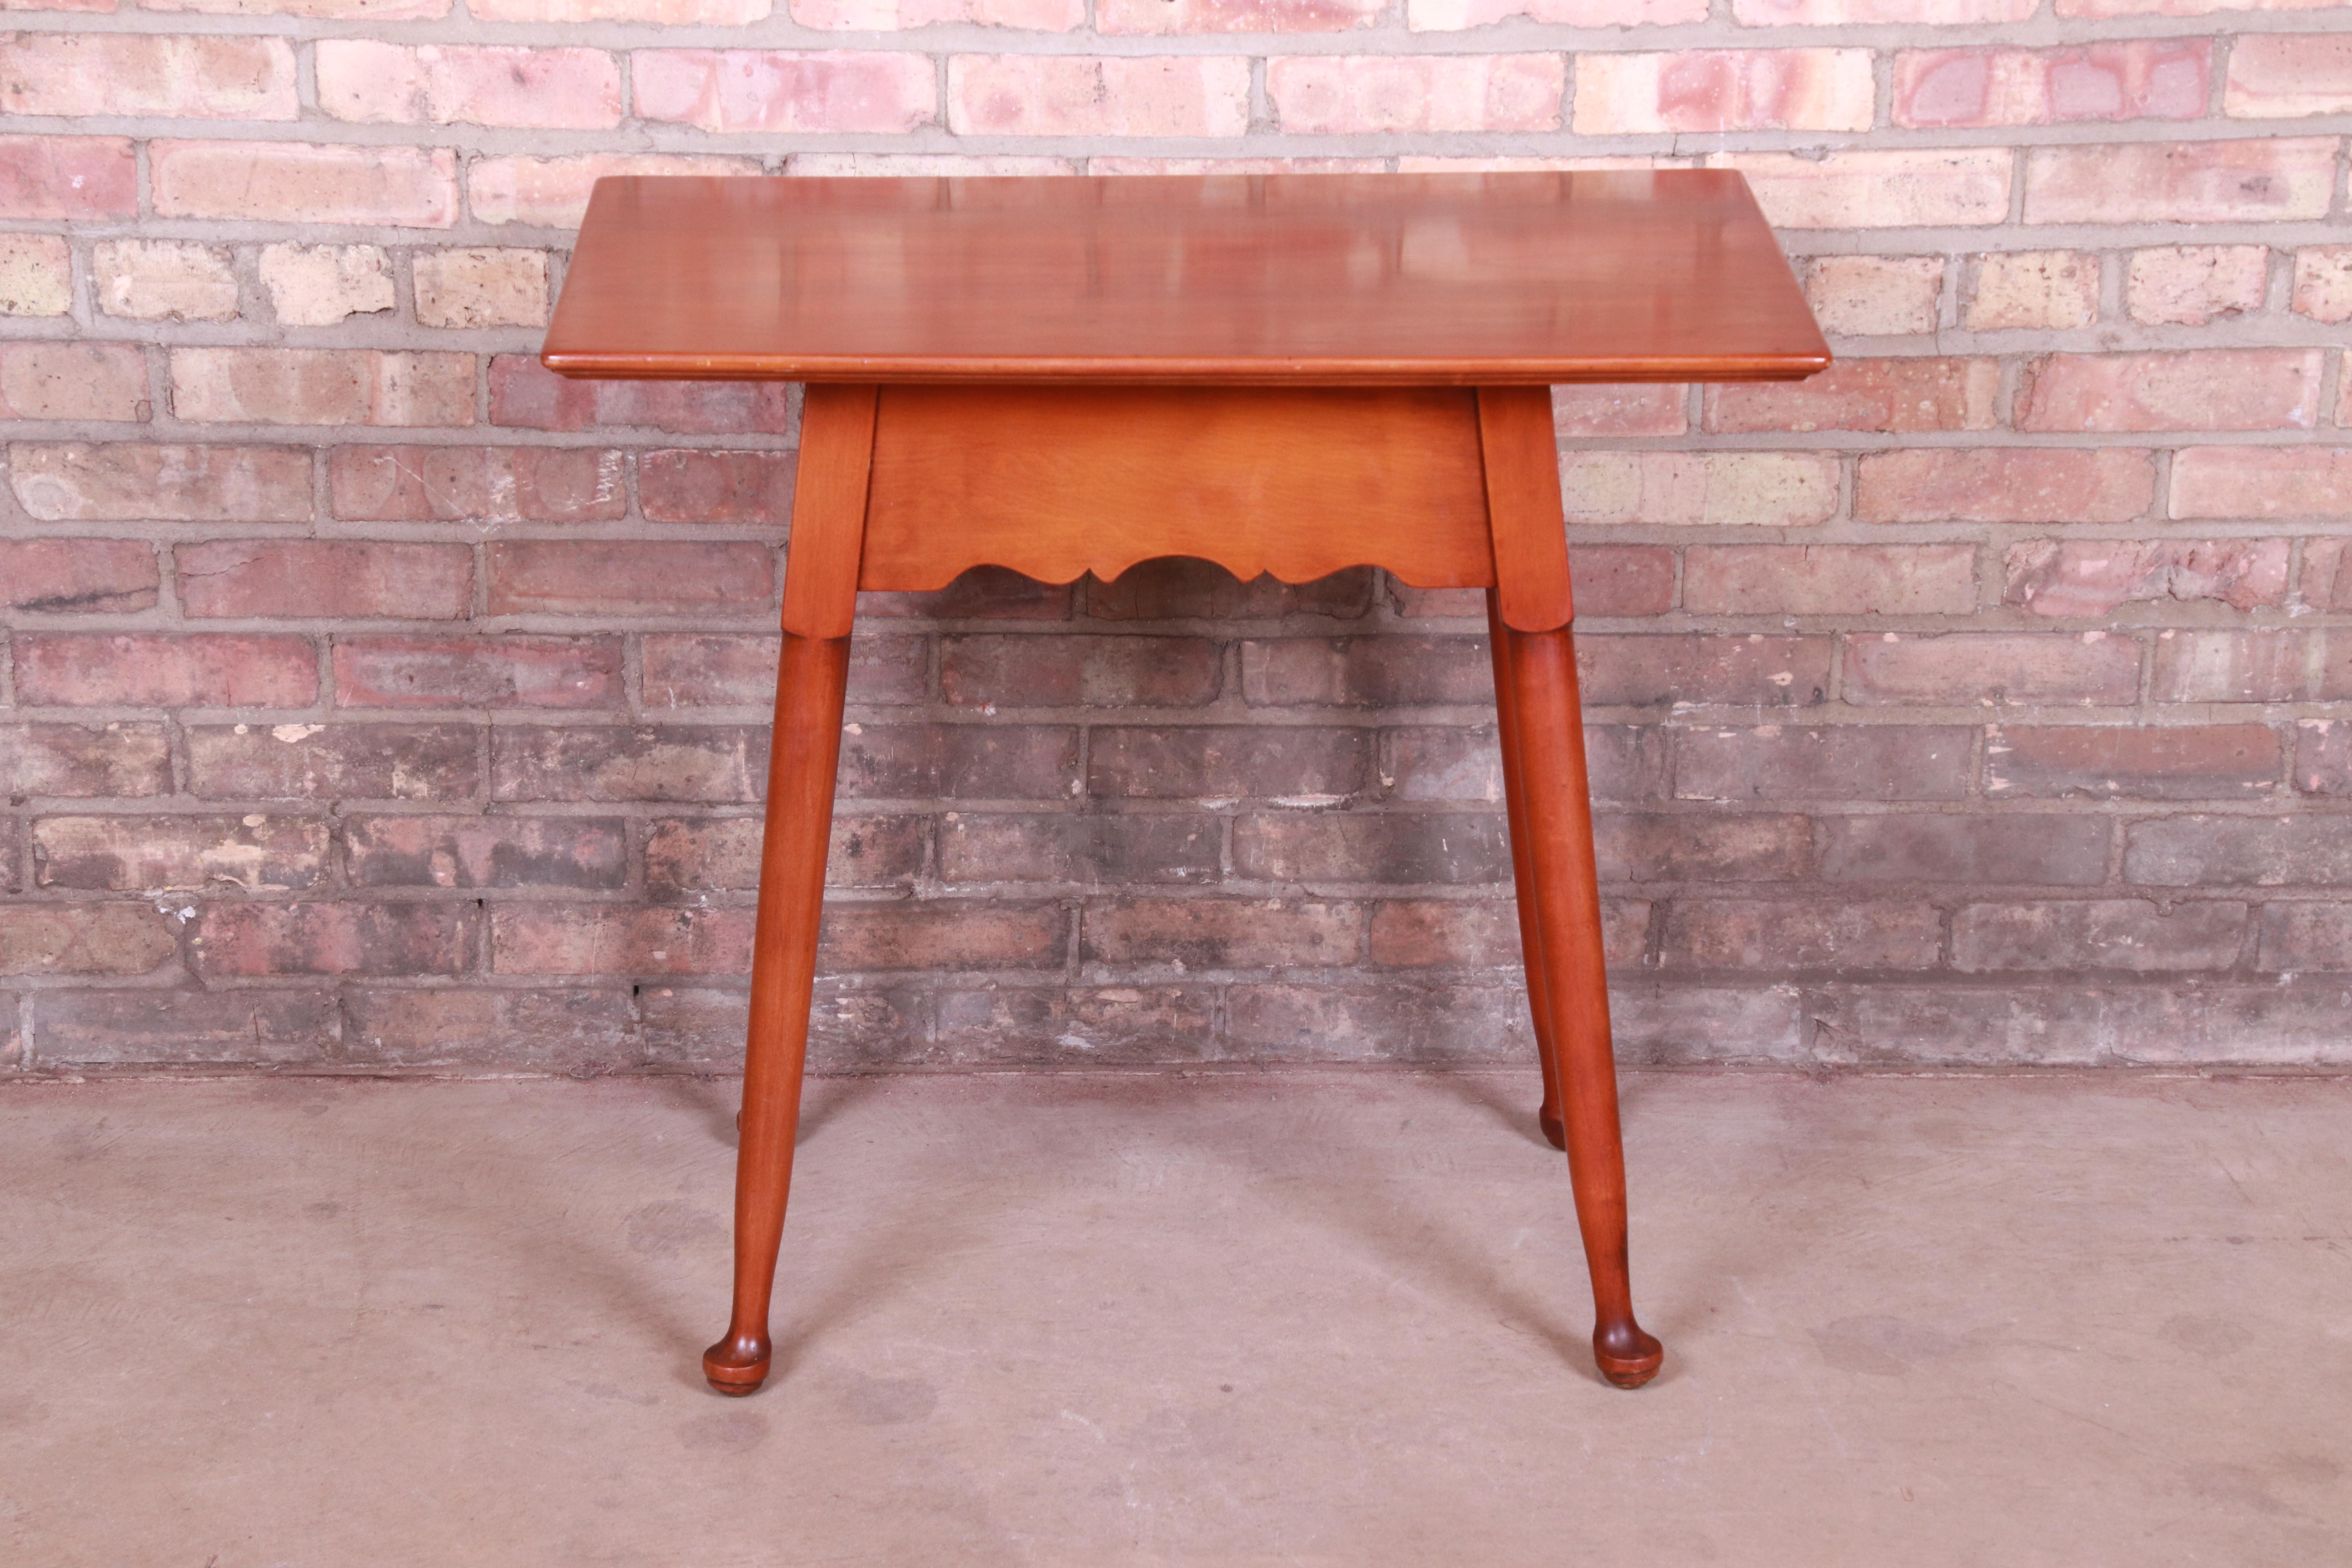 A gorgeous American Colonial solid cherrywood tea table or occasional side table

By Stickley

USA, mid-20th century

Measures: 30